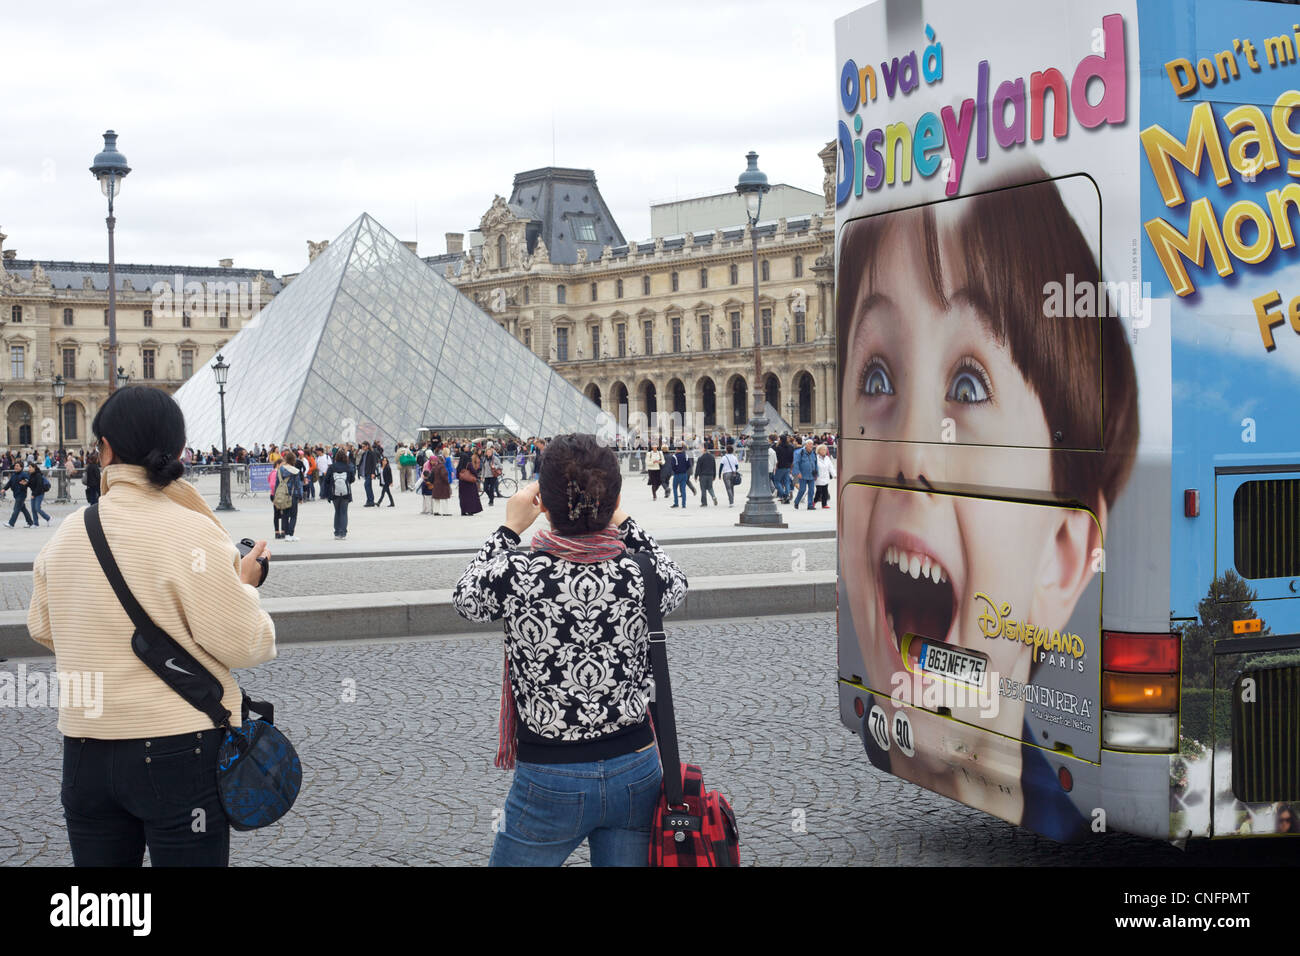 Tourists photograph the pyramid outside the Louvre museum in Paris, France Stock Photo